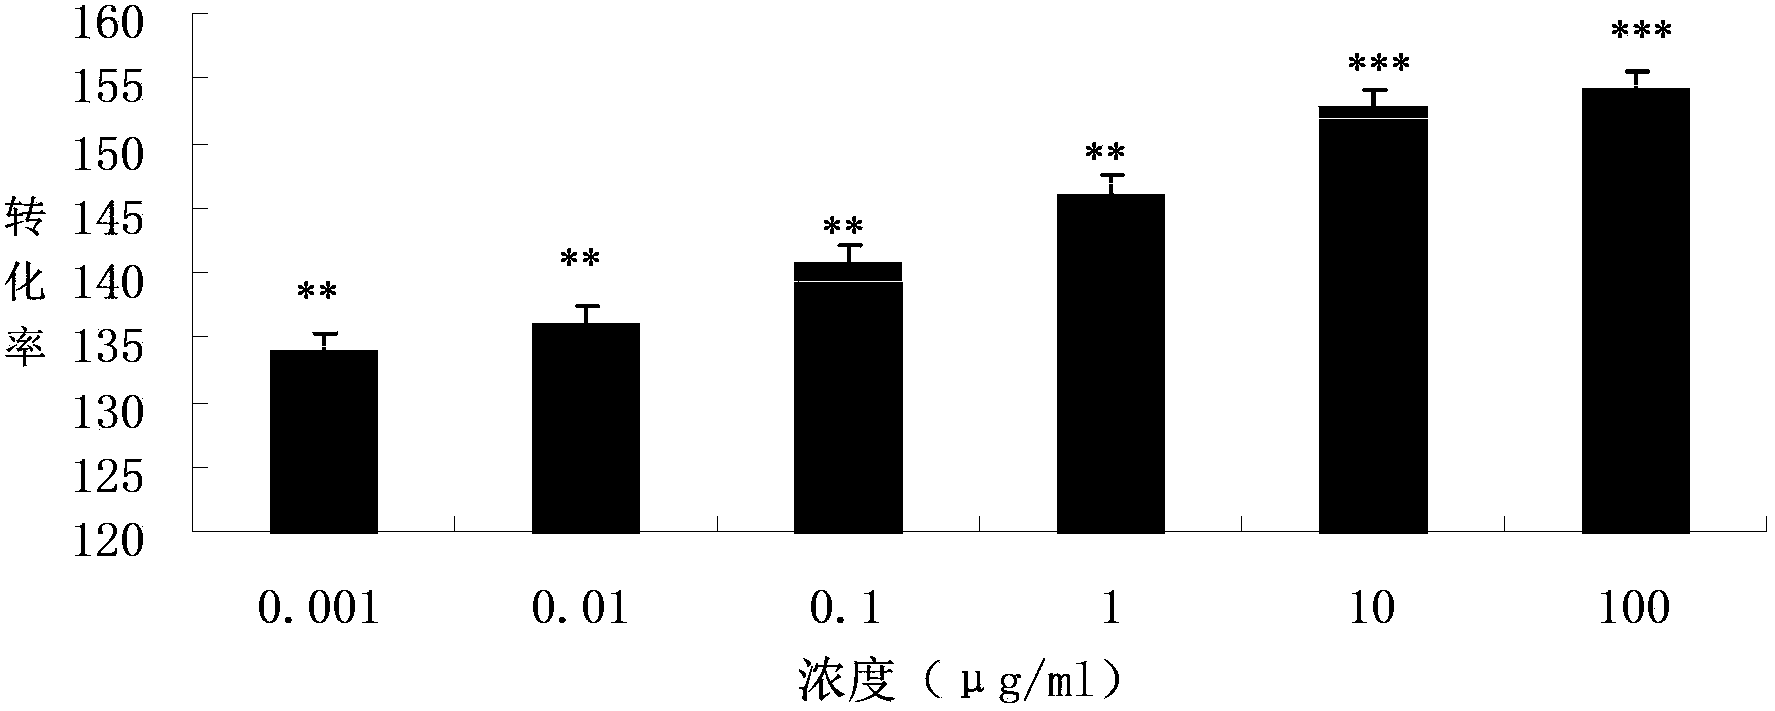 Preparation method of wood frog spawn extract with immunity enhancing function